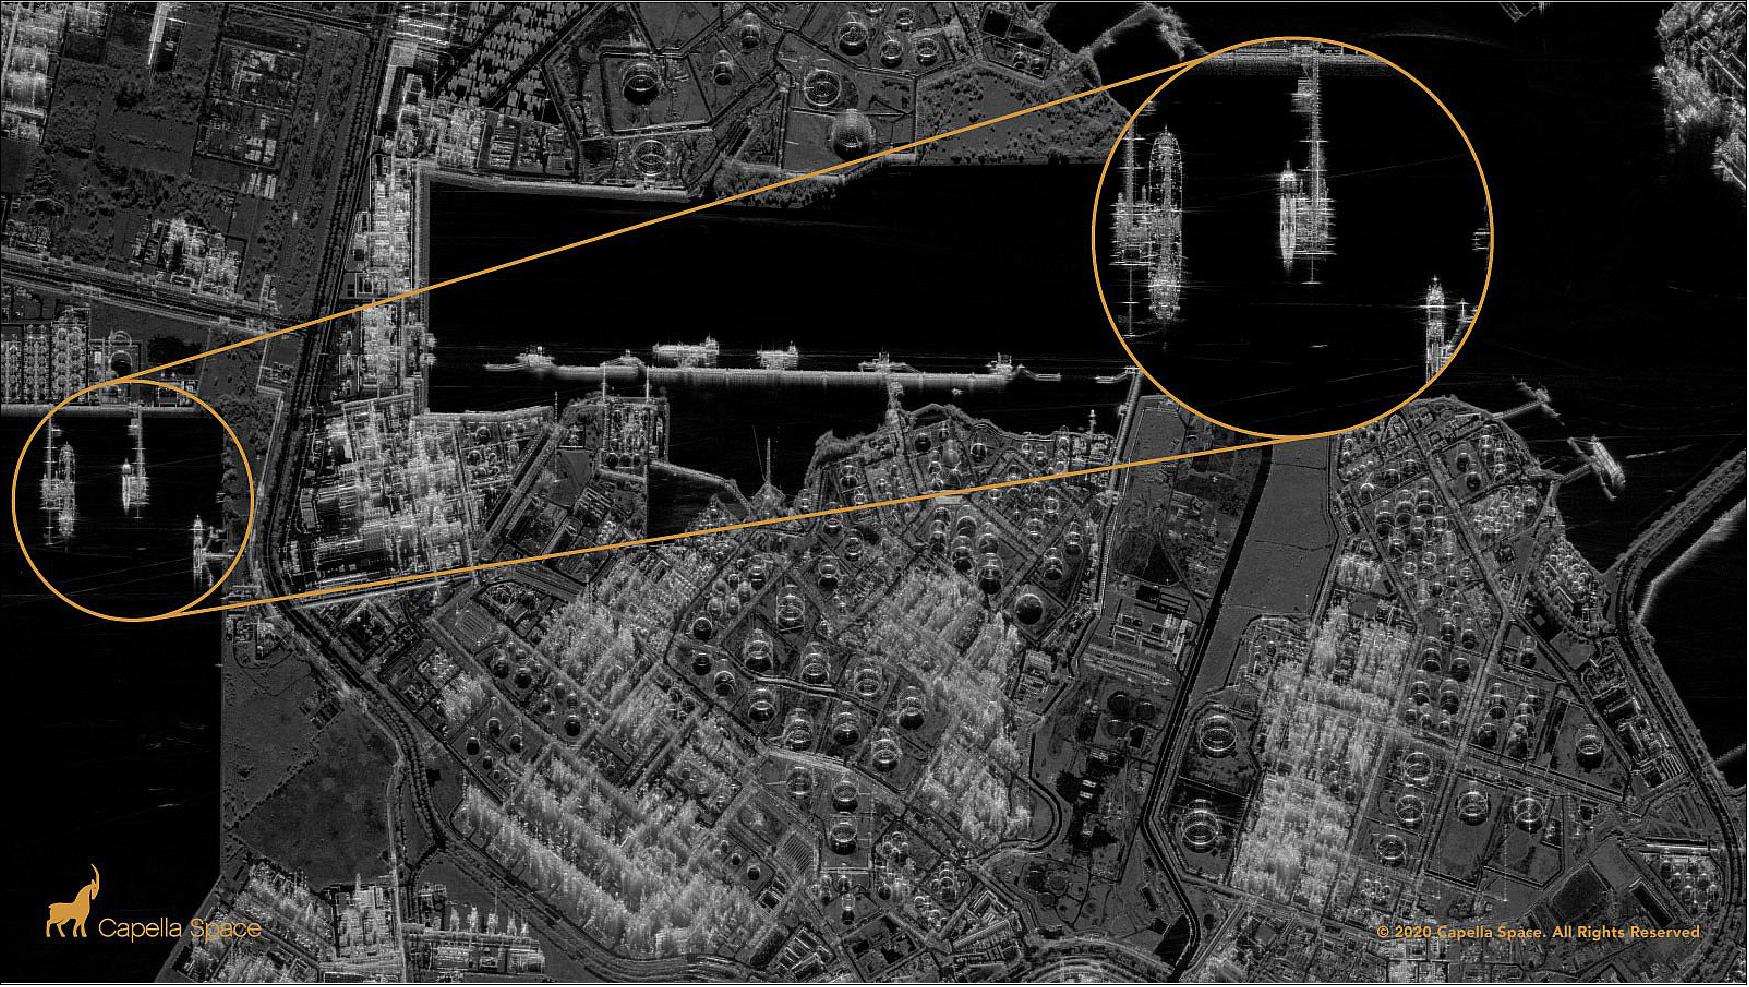 Figure 16: The metallic refining units and piping brightly reflect radar signals at ExxonMobil’s Singapore Chemical plant on Jurong Island. Very high resolution zoomed in views show the granular features of an oil tanker docked near floating roof storage tanks (image credit: Capella Space)